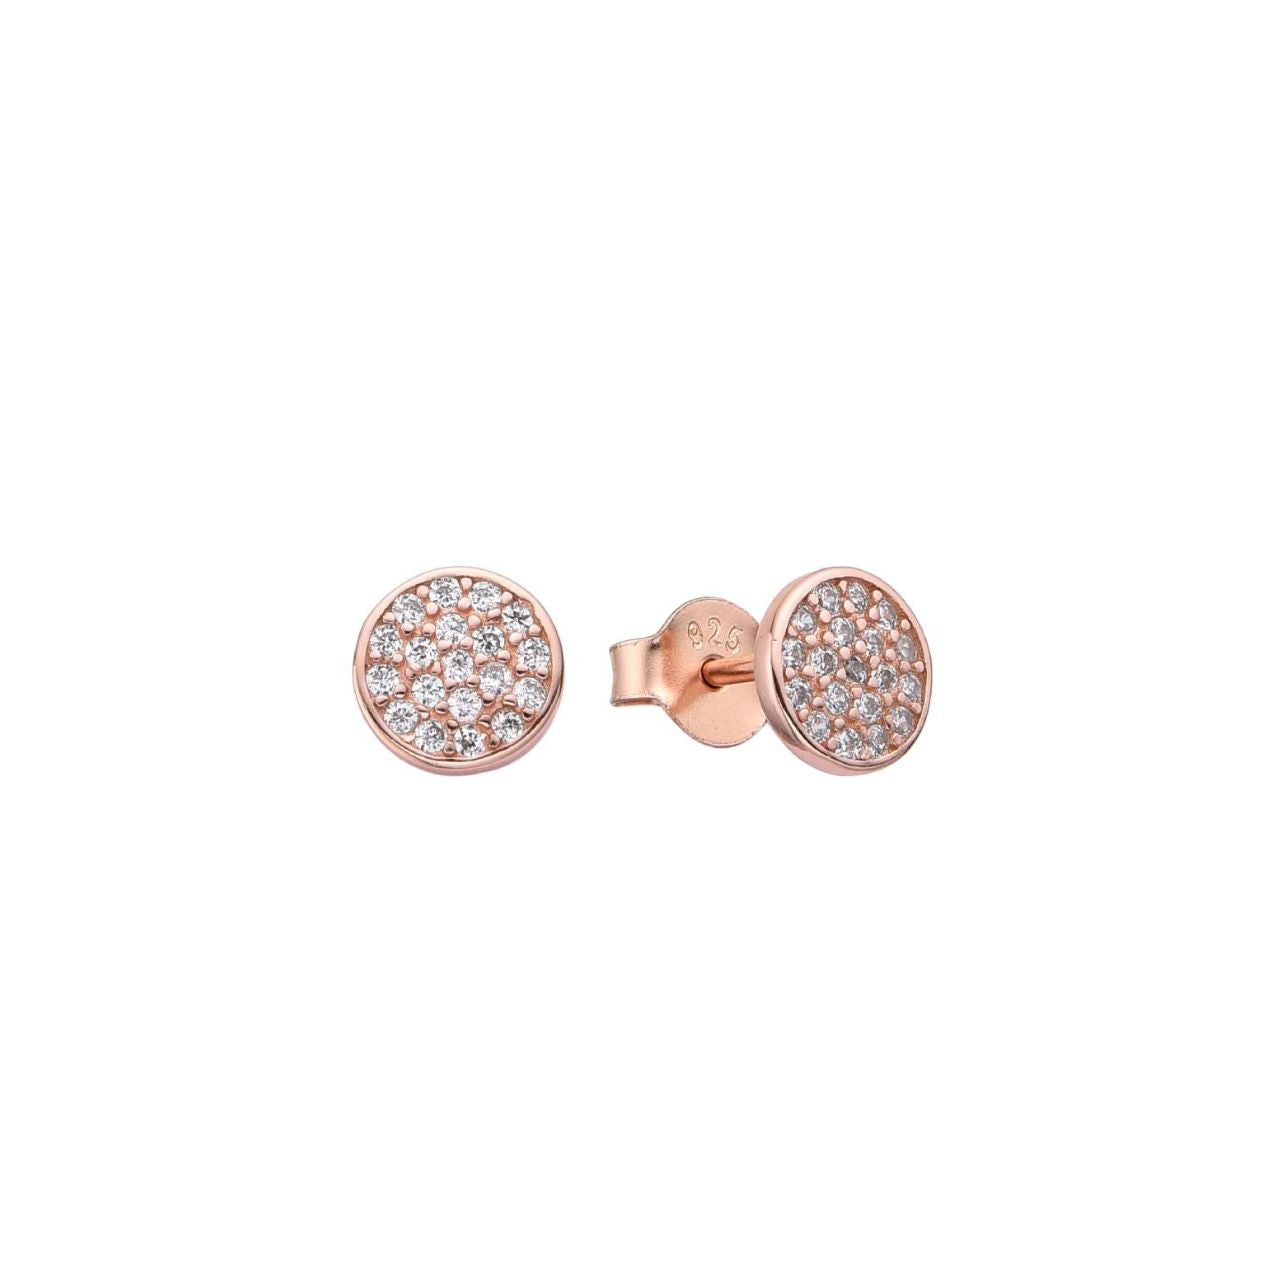 Dahlia Cubic Zirconia Stud Earrings – Rose Gold  A pair of rose gold plated sterling silver studs enhanced with cubic zirconia forming a dahlia pattern. These earrings have an anti-tarnish coating and measure approx. 8mm in diameter.